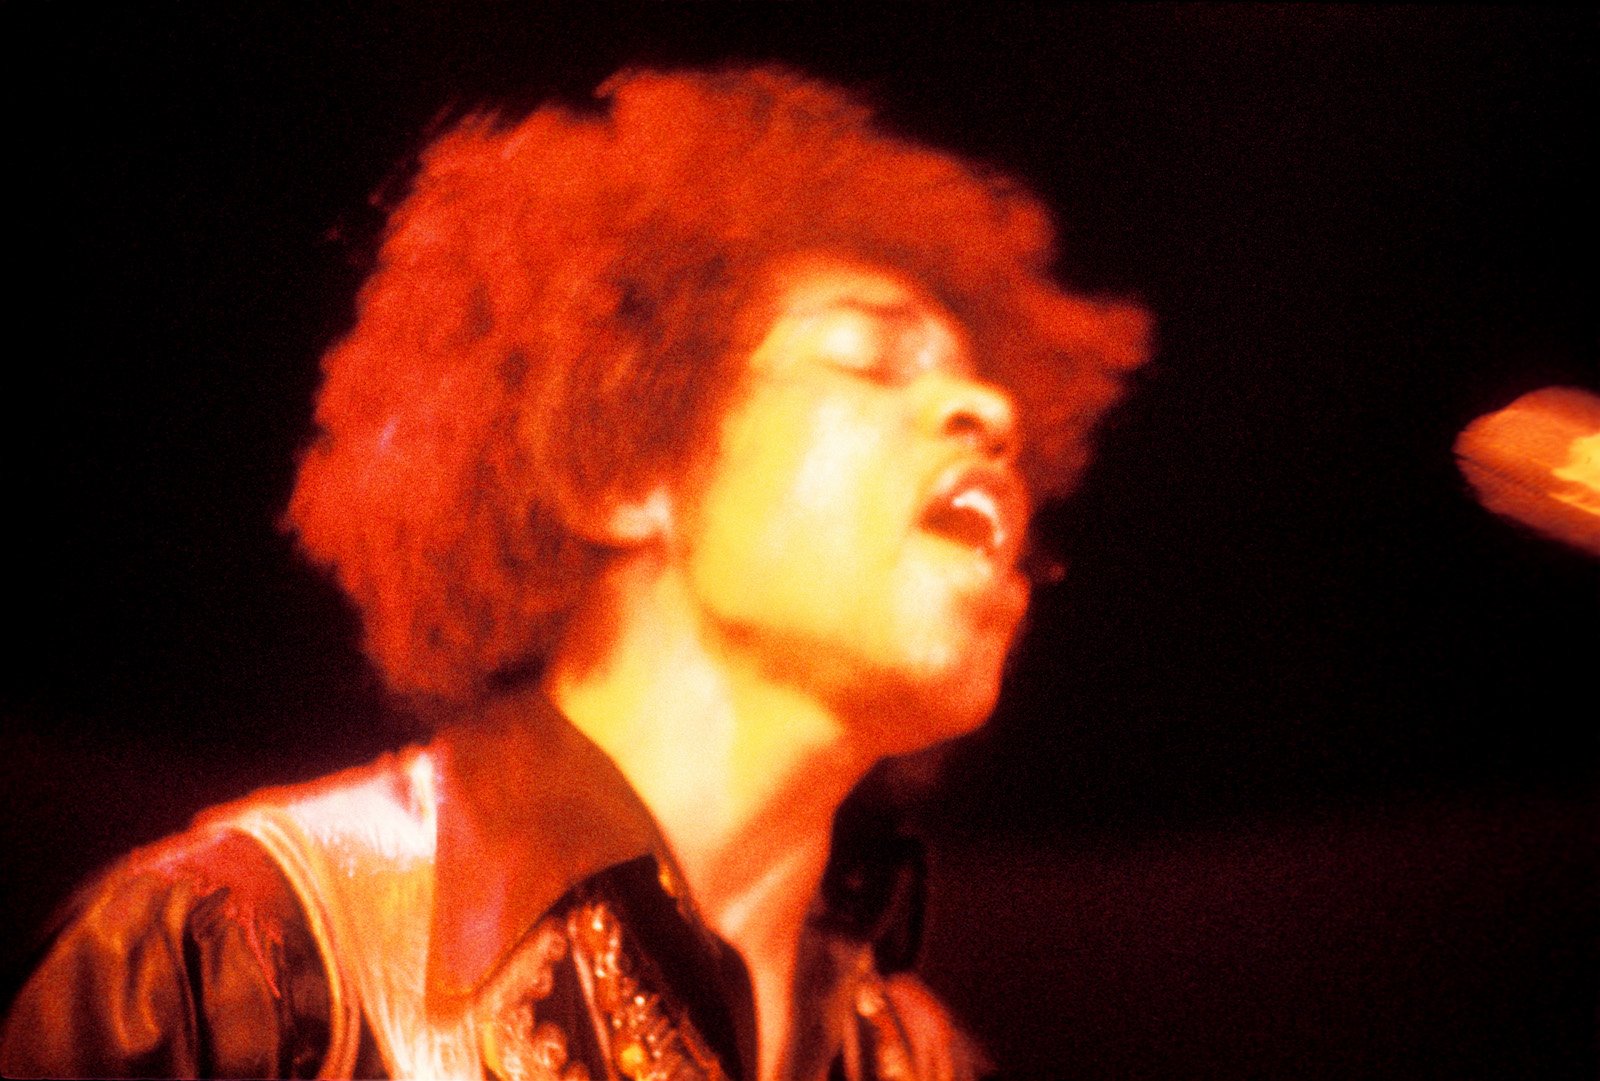 Jimi Hendrix, who often didn't have control of his album covers, performing on stage